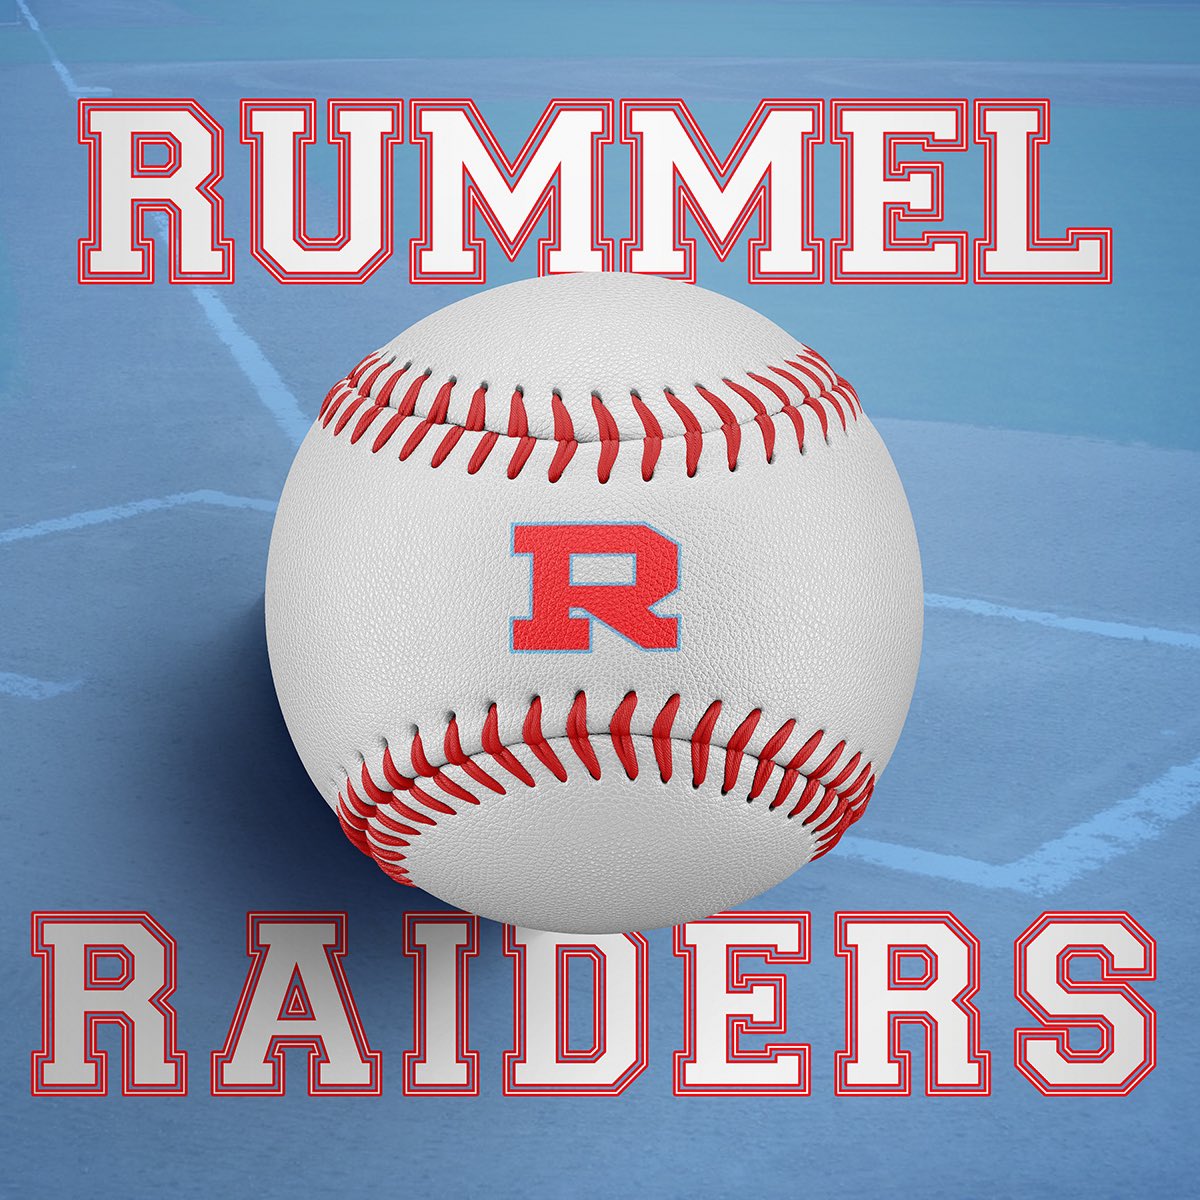 FINAL (Game 2) Rummel 11, Carencro 0 * #3 seed Raiders advance to the State Quarterfinals to face #6 seed Alexandria